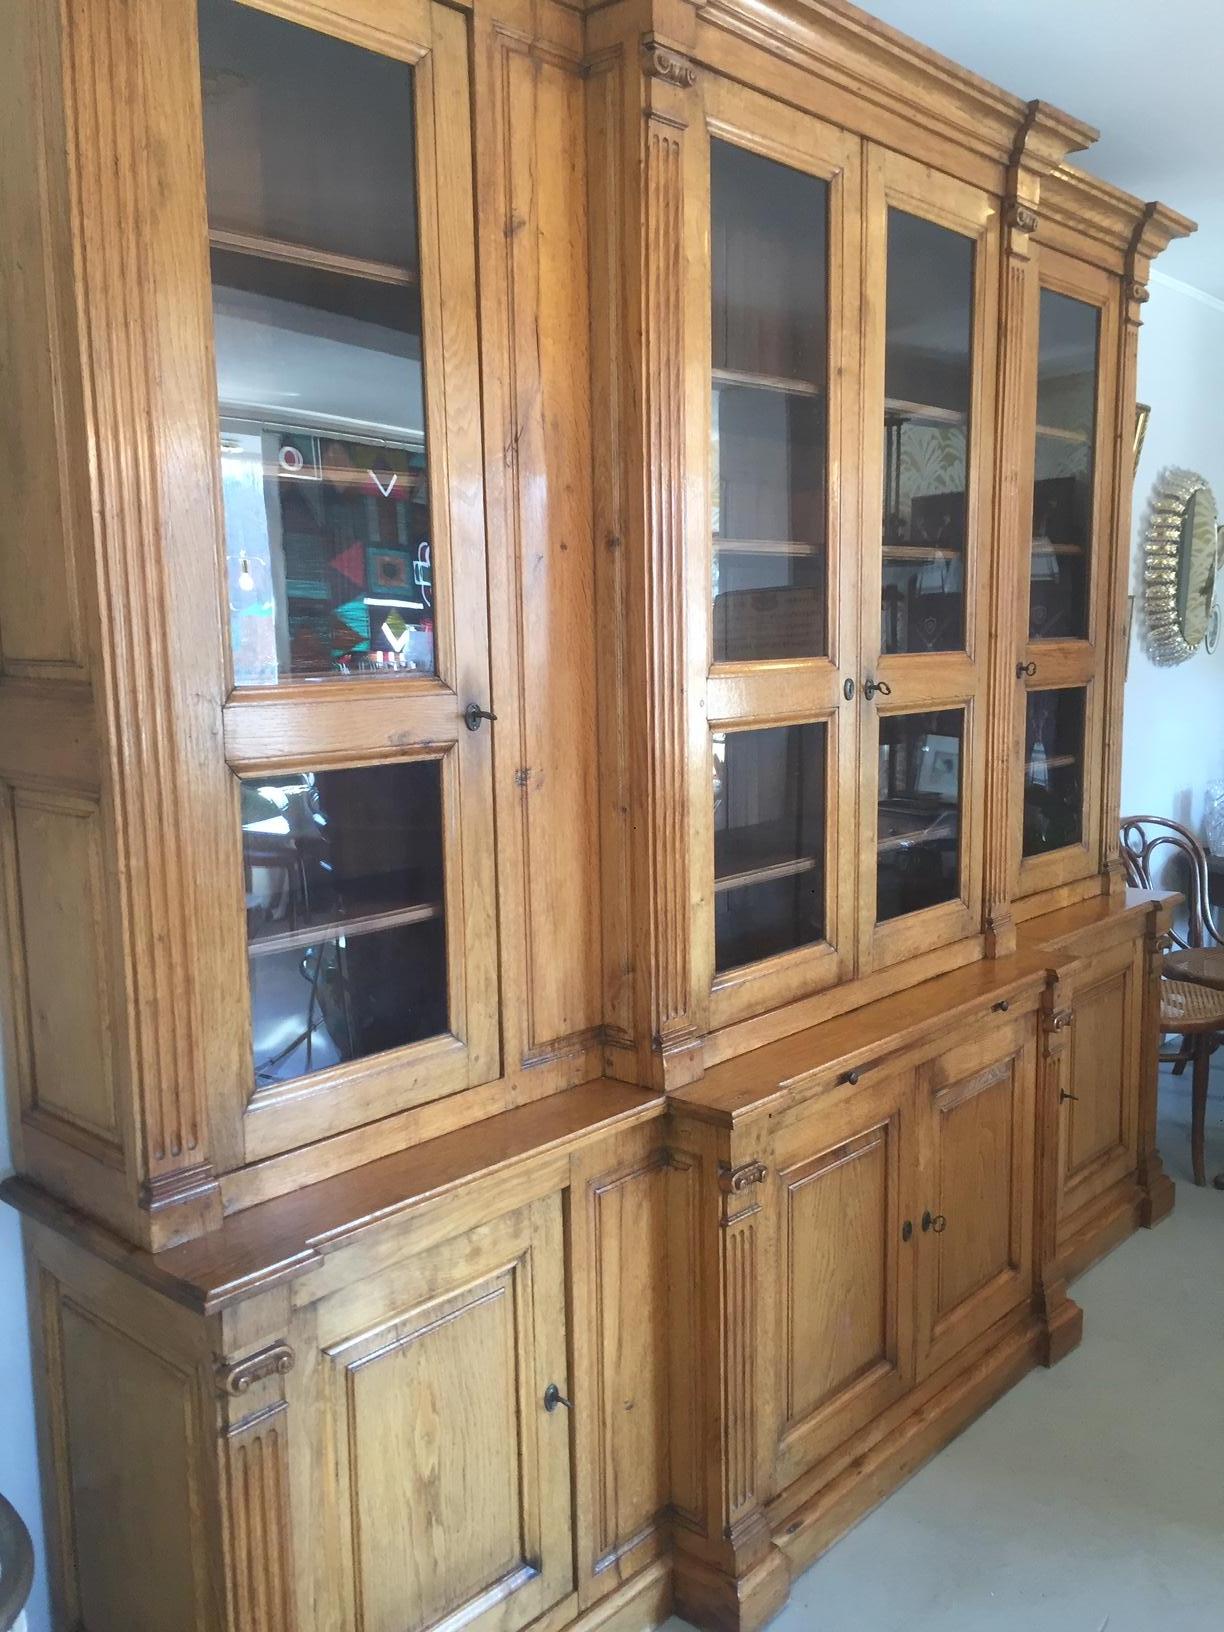 Beautiful 20th century French oak Bibliotheque bookcase in two parts, from the 1900s.
Four glass doors with their originals keys on the top part and four solid doors on the bottom part. A hidden drawbar on the middle of the two parts.
All the